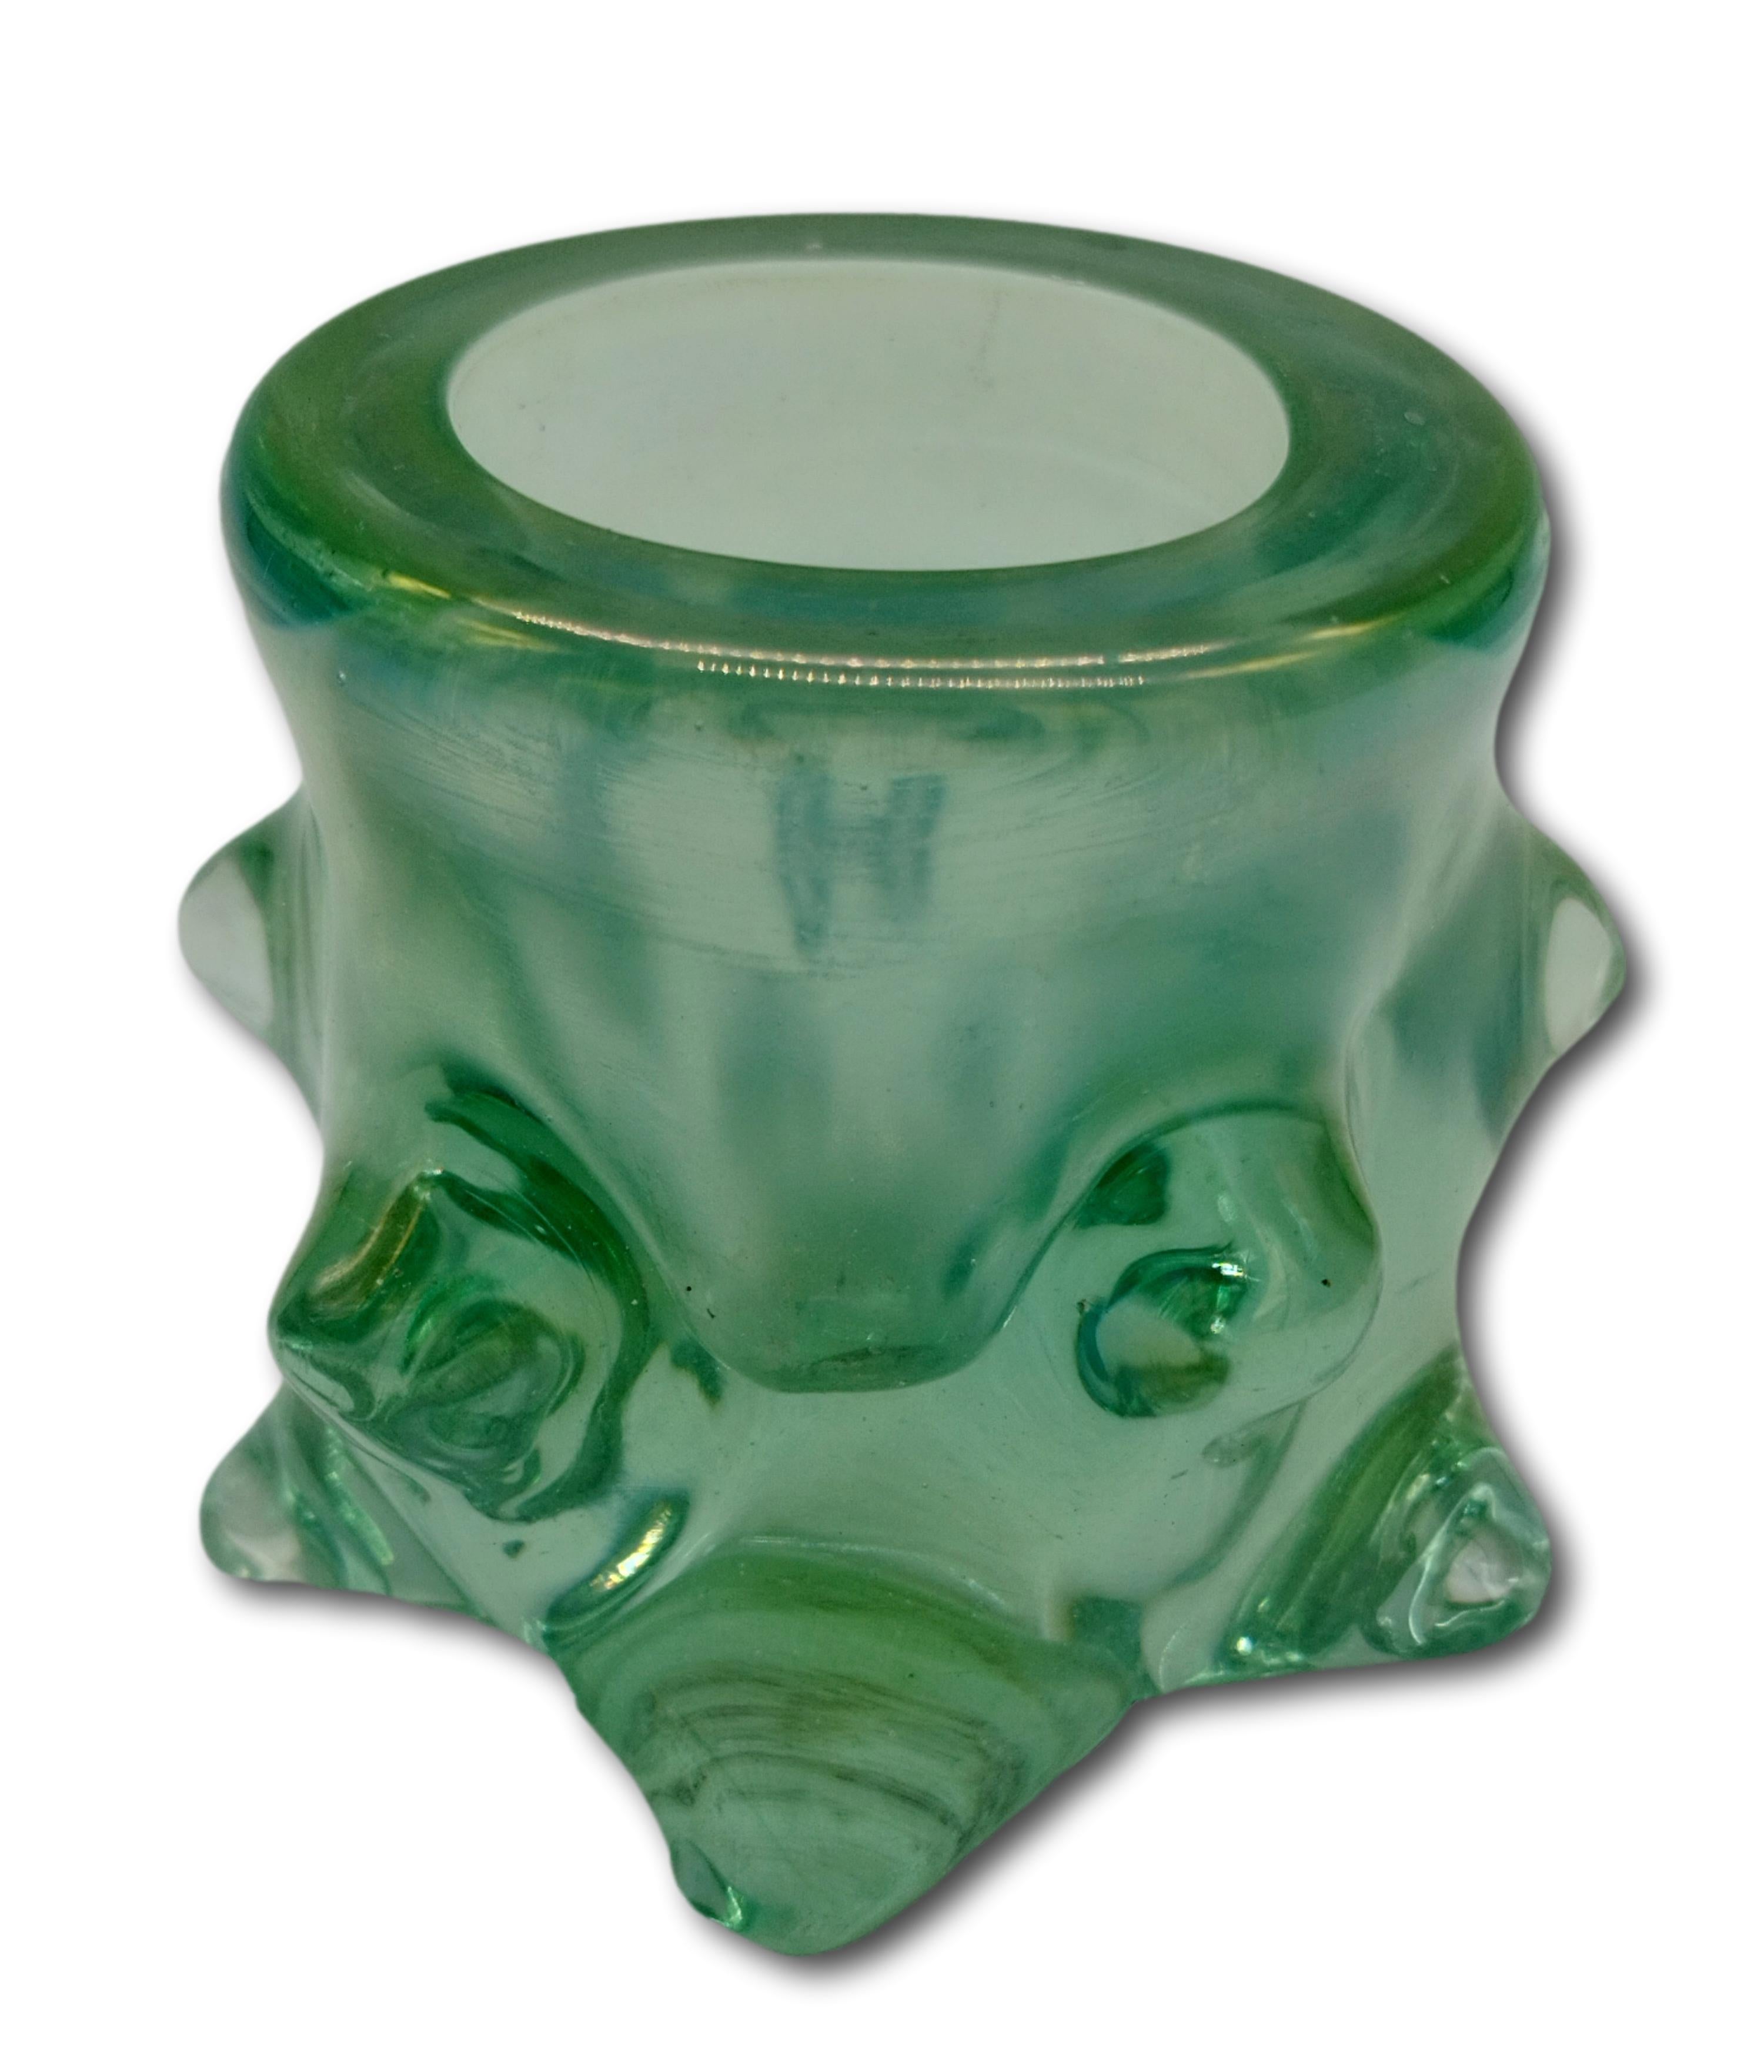 
Small vase from the Mugnoni series in heavy green glass decorated with protuberances containing air bubbles.
This vase is a vintage item, so it may show slight signs of use, but it is to be considered as in excellent original condition and ready to